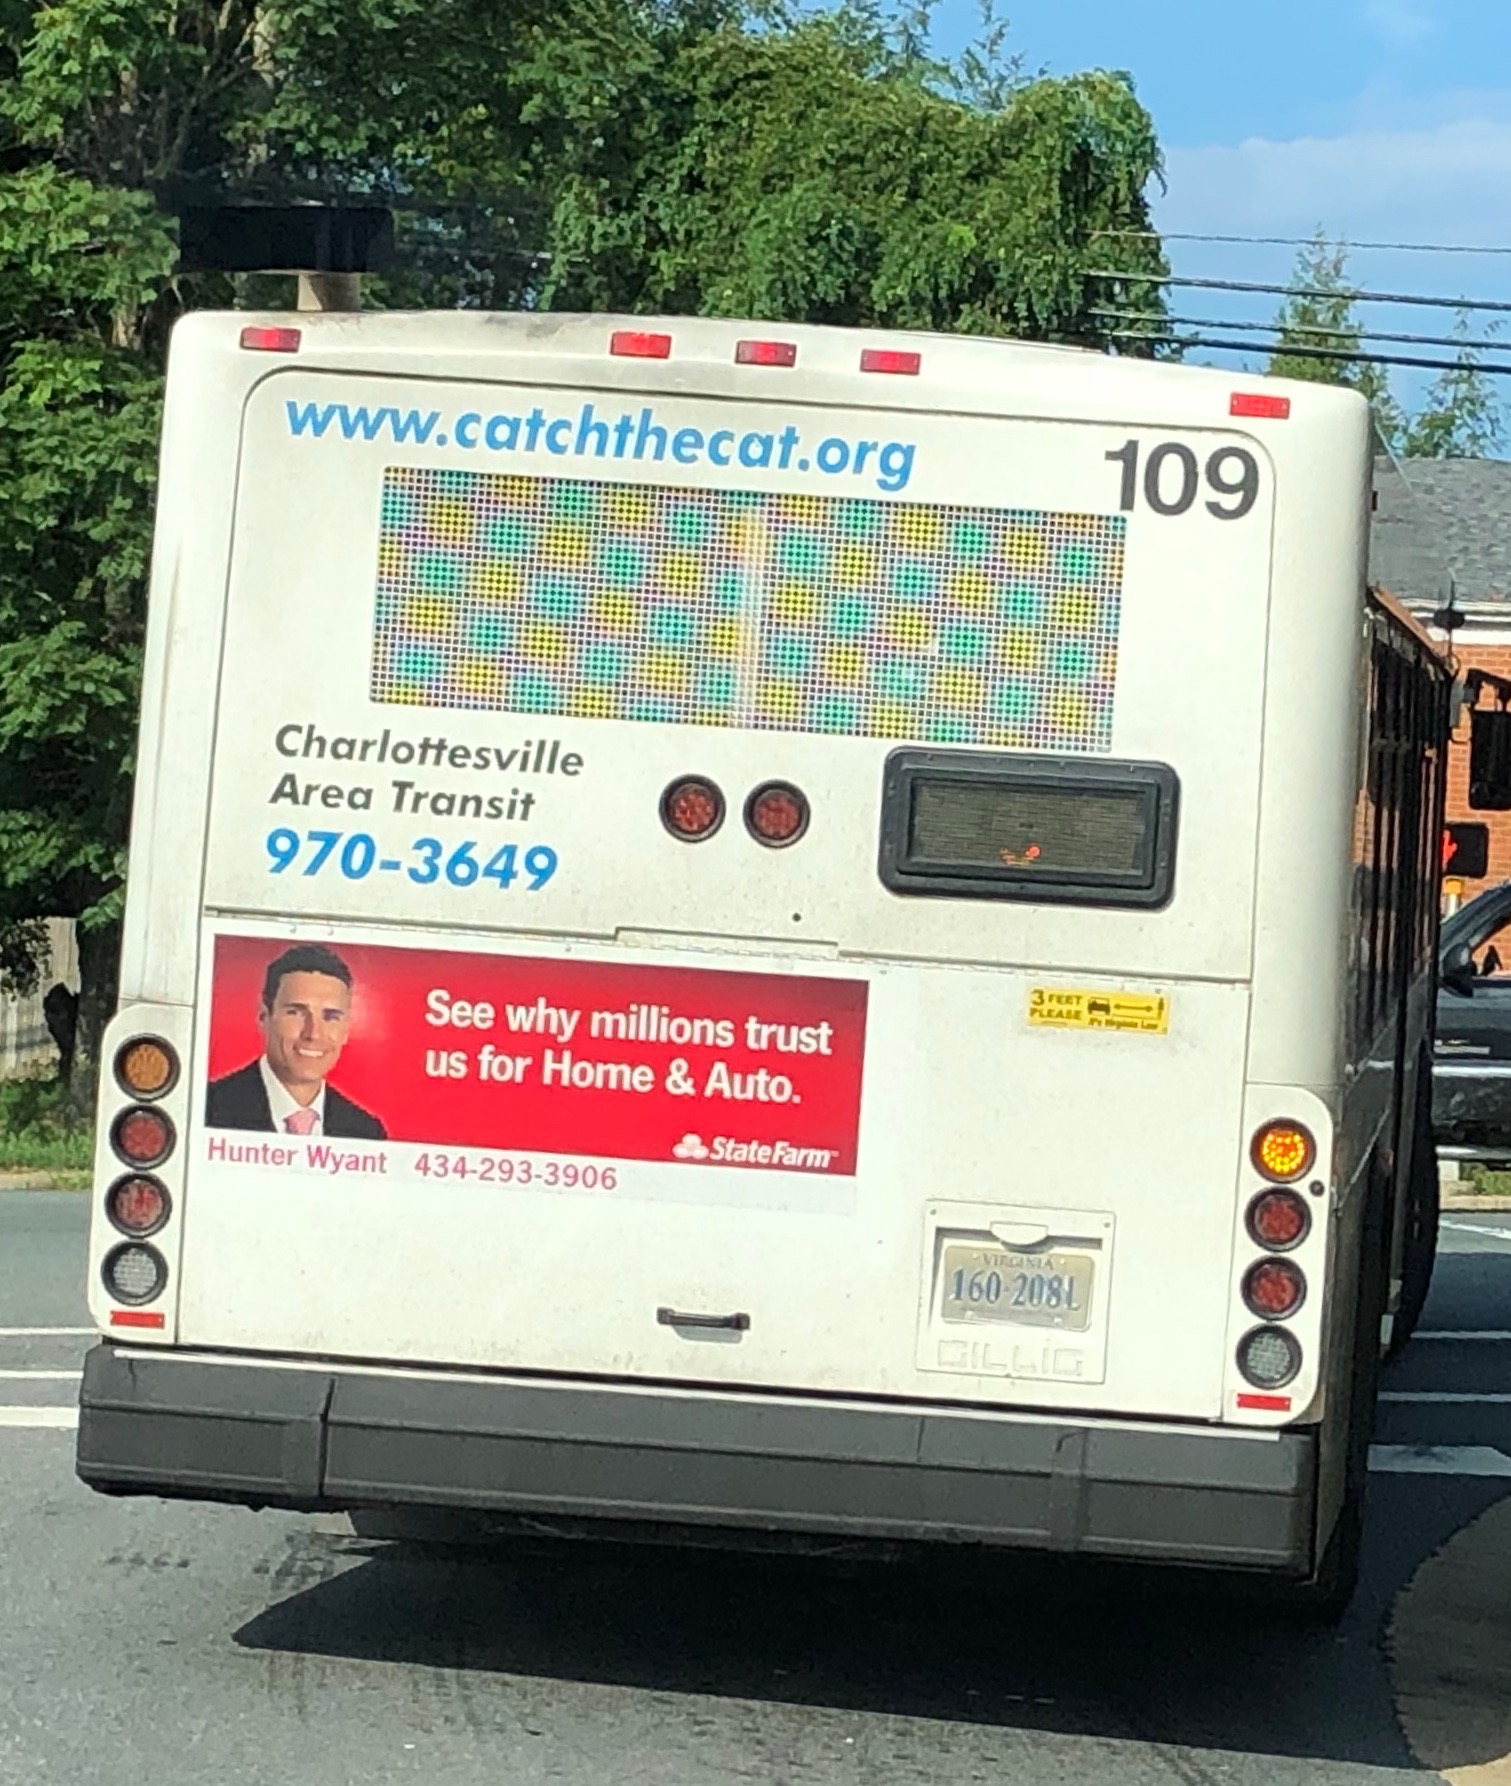 Wyant’s image on the back of a bus as part of a State Farm ad